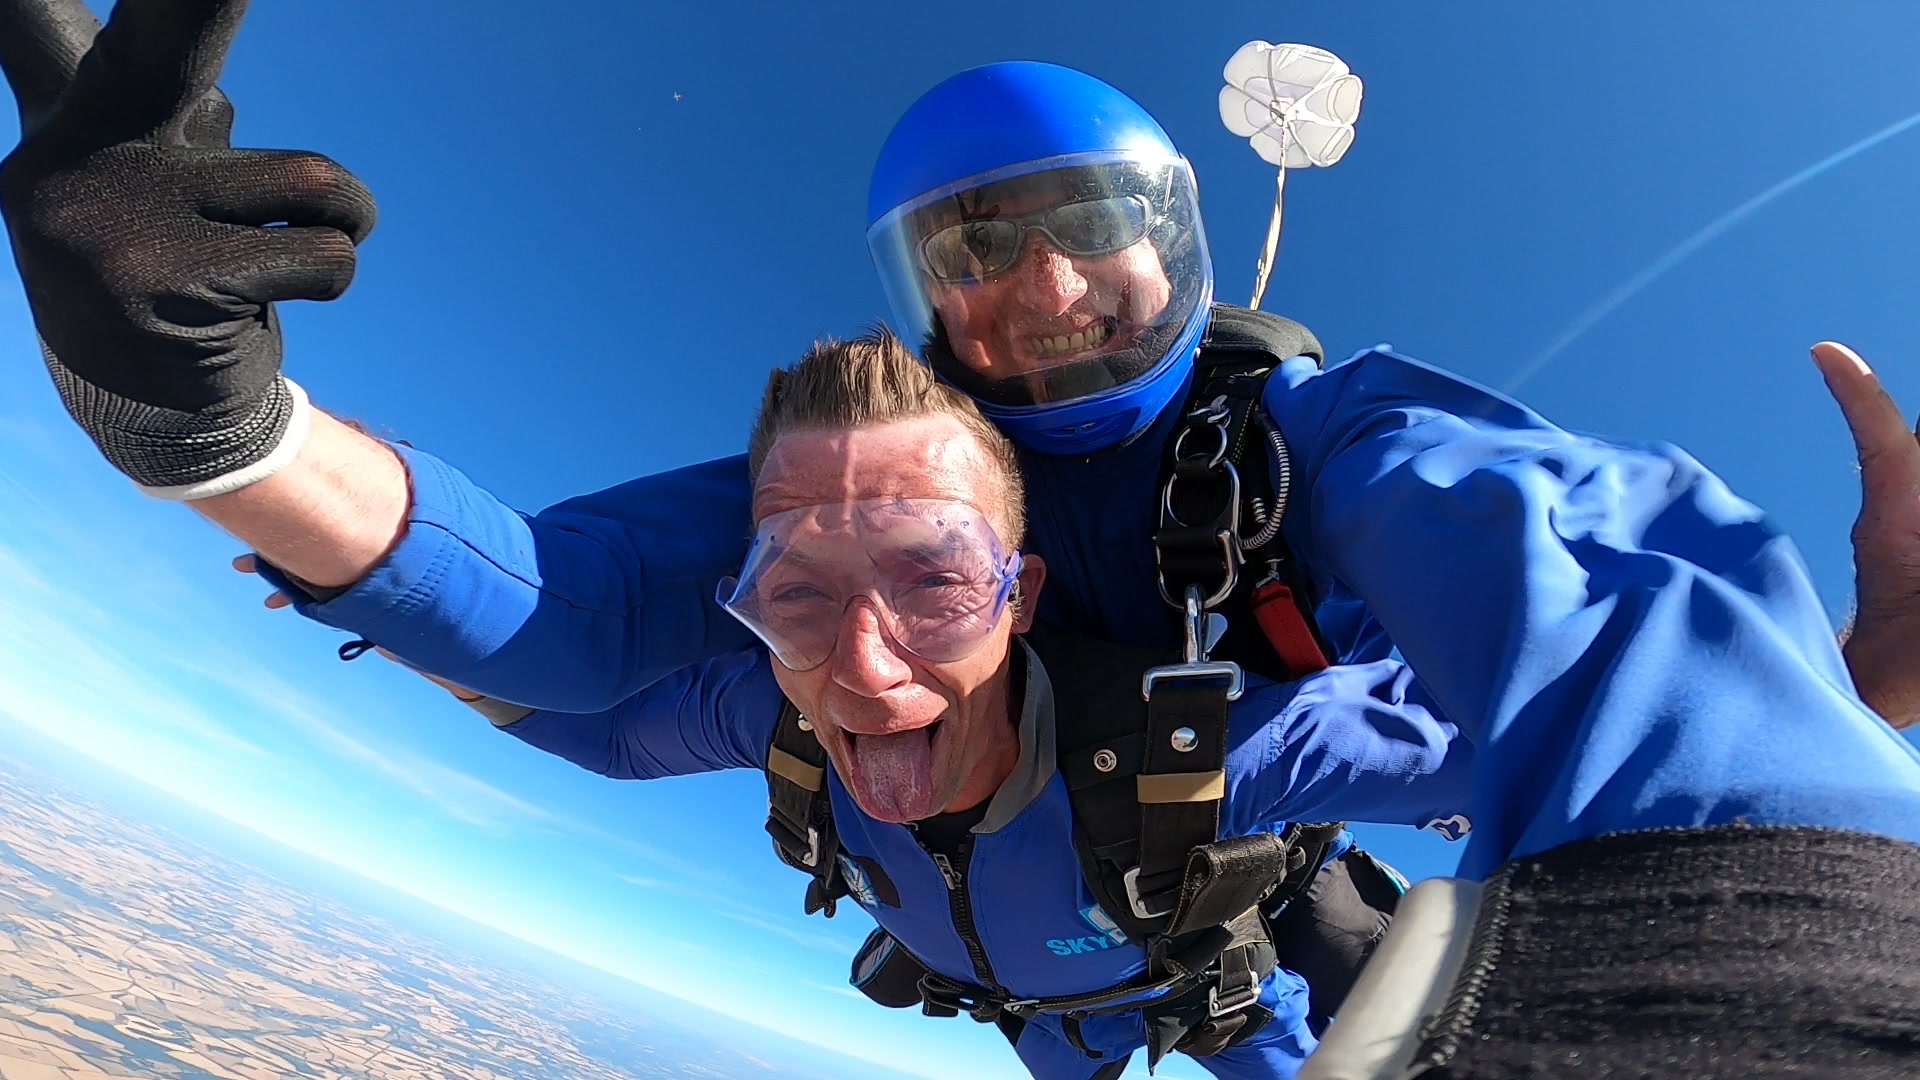 Skydive instructor with customer filming on handcam